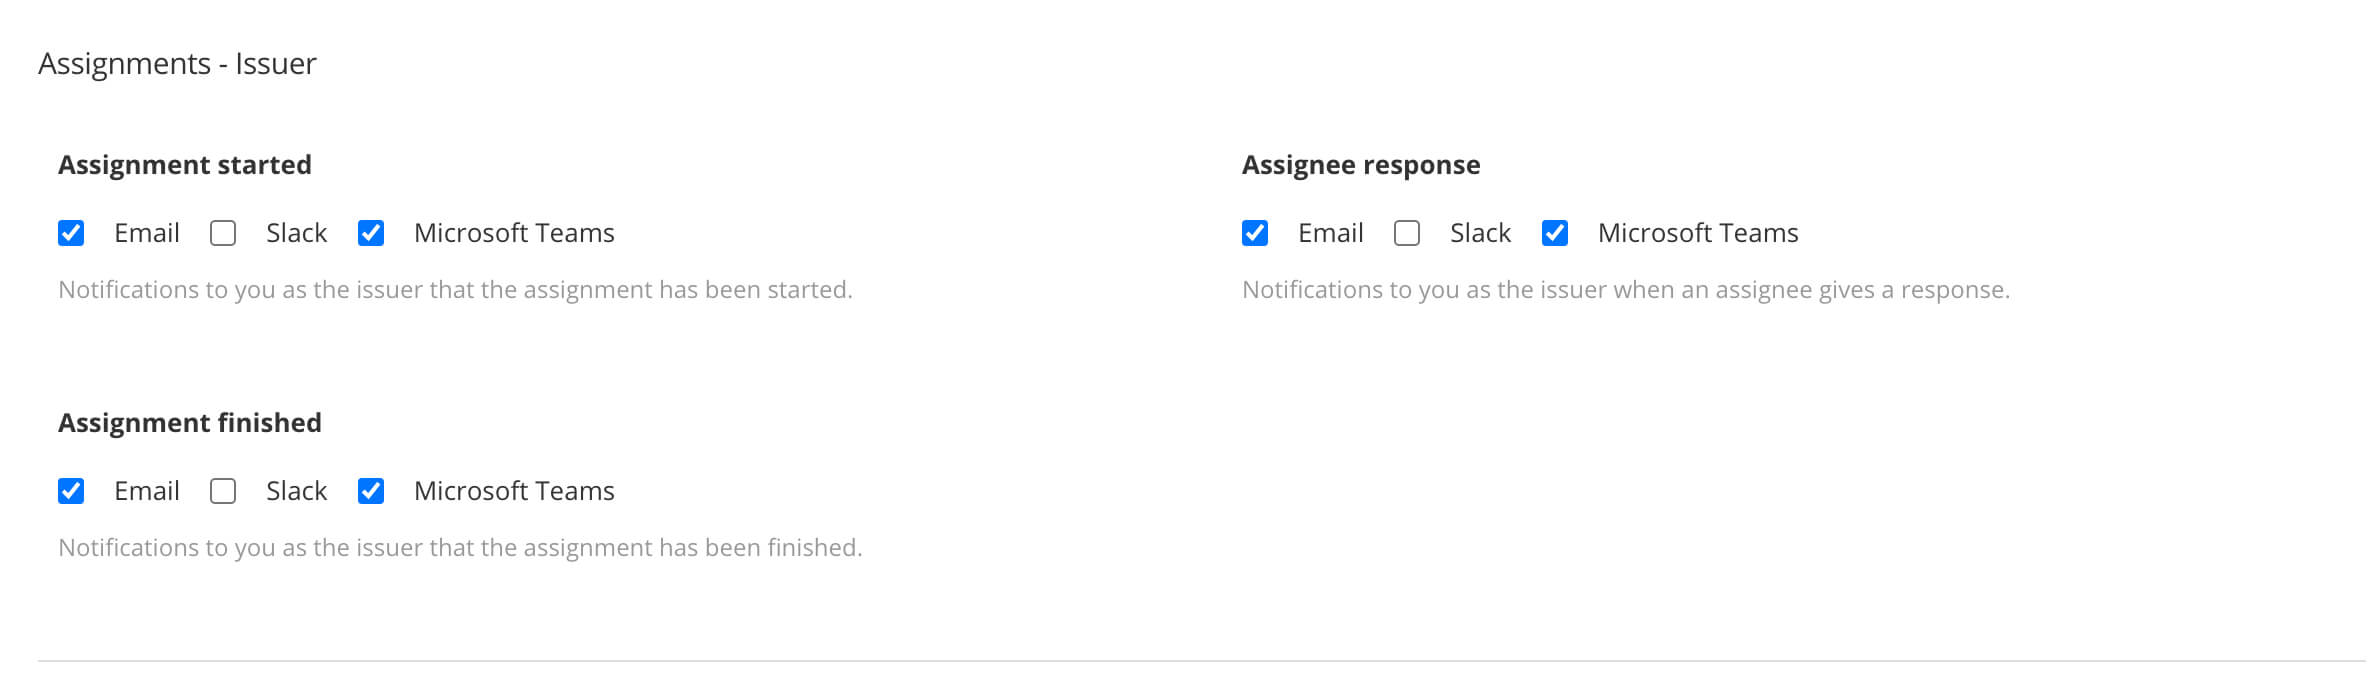 Assignments settings on Integrations tab of My Profile. Use to choose if you are notified when an assignment starts, ends, and if another user responds to the assignment. Also choose how you are notified.